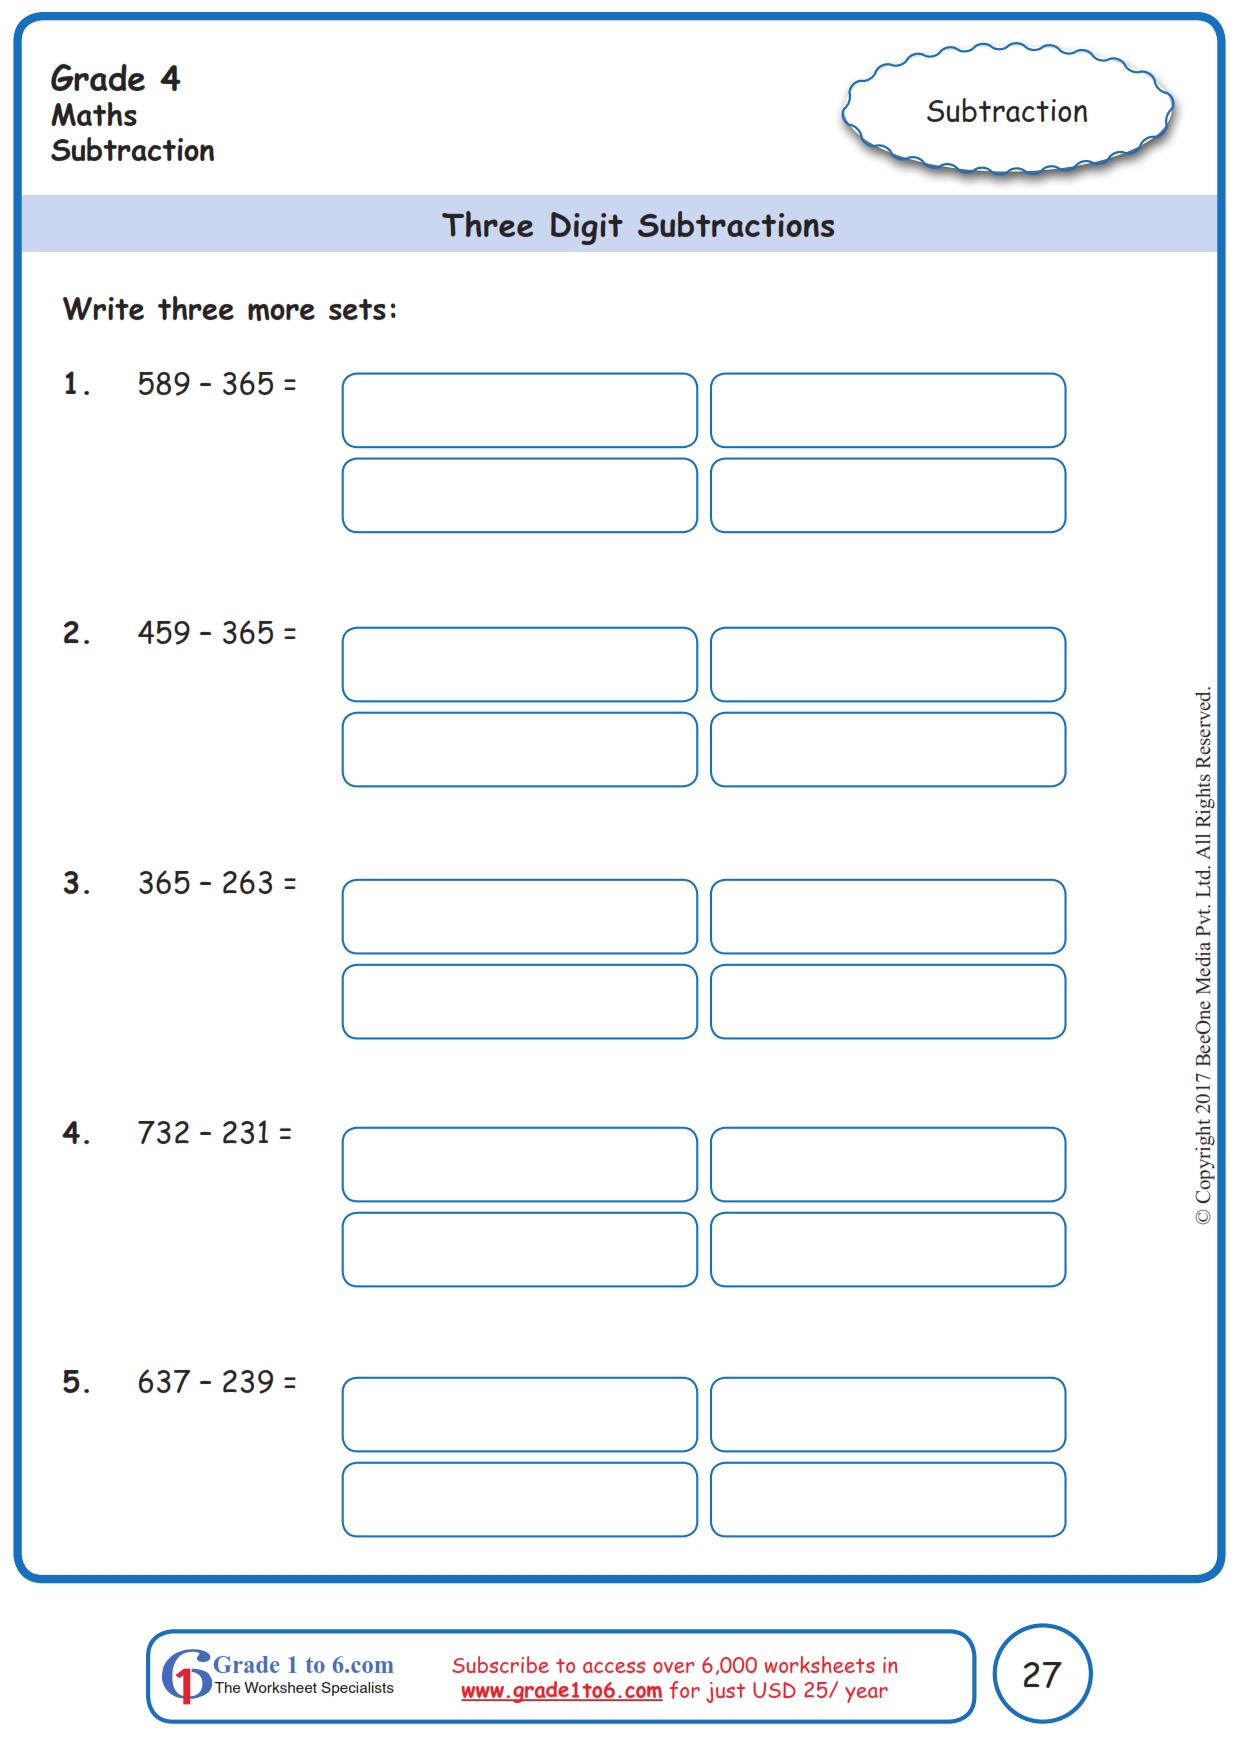 3 digits subtraction worksheets www grade1to6 com